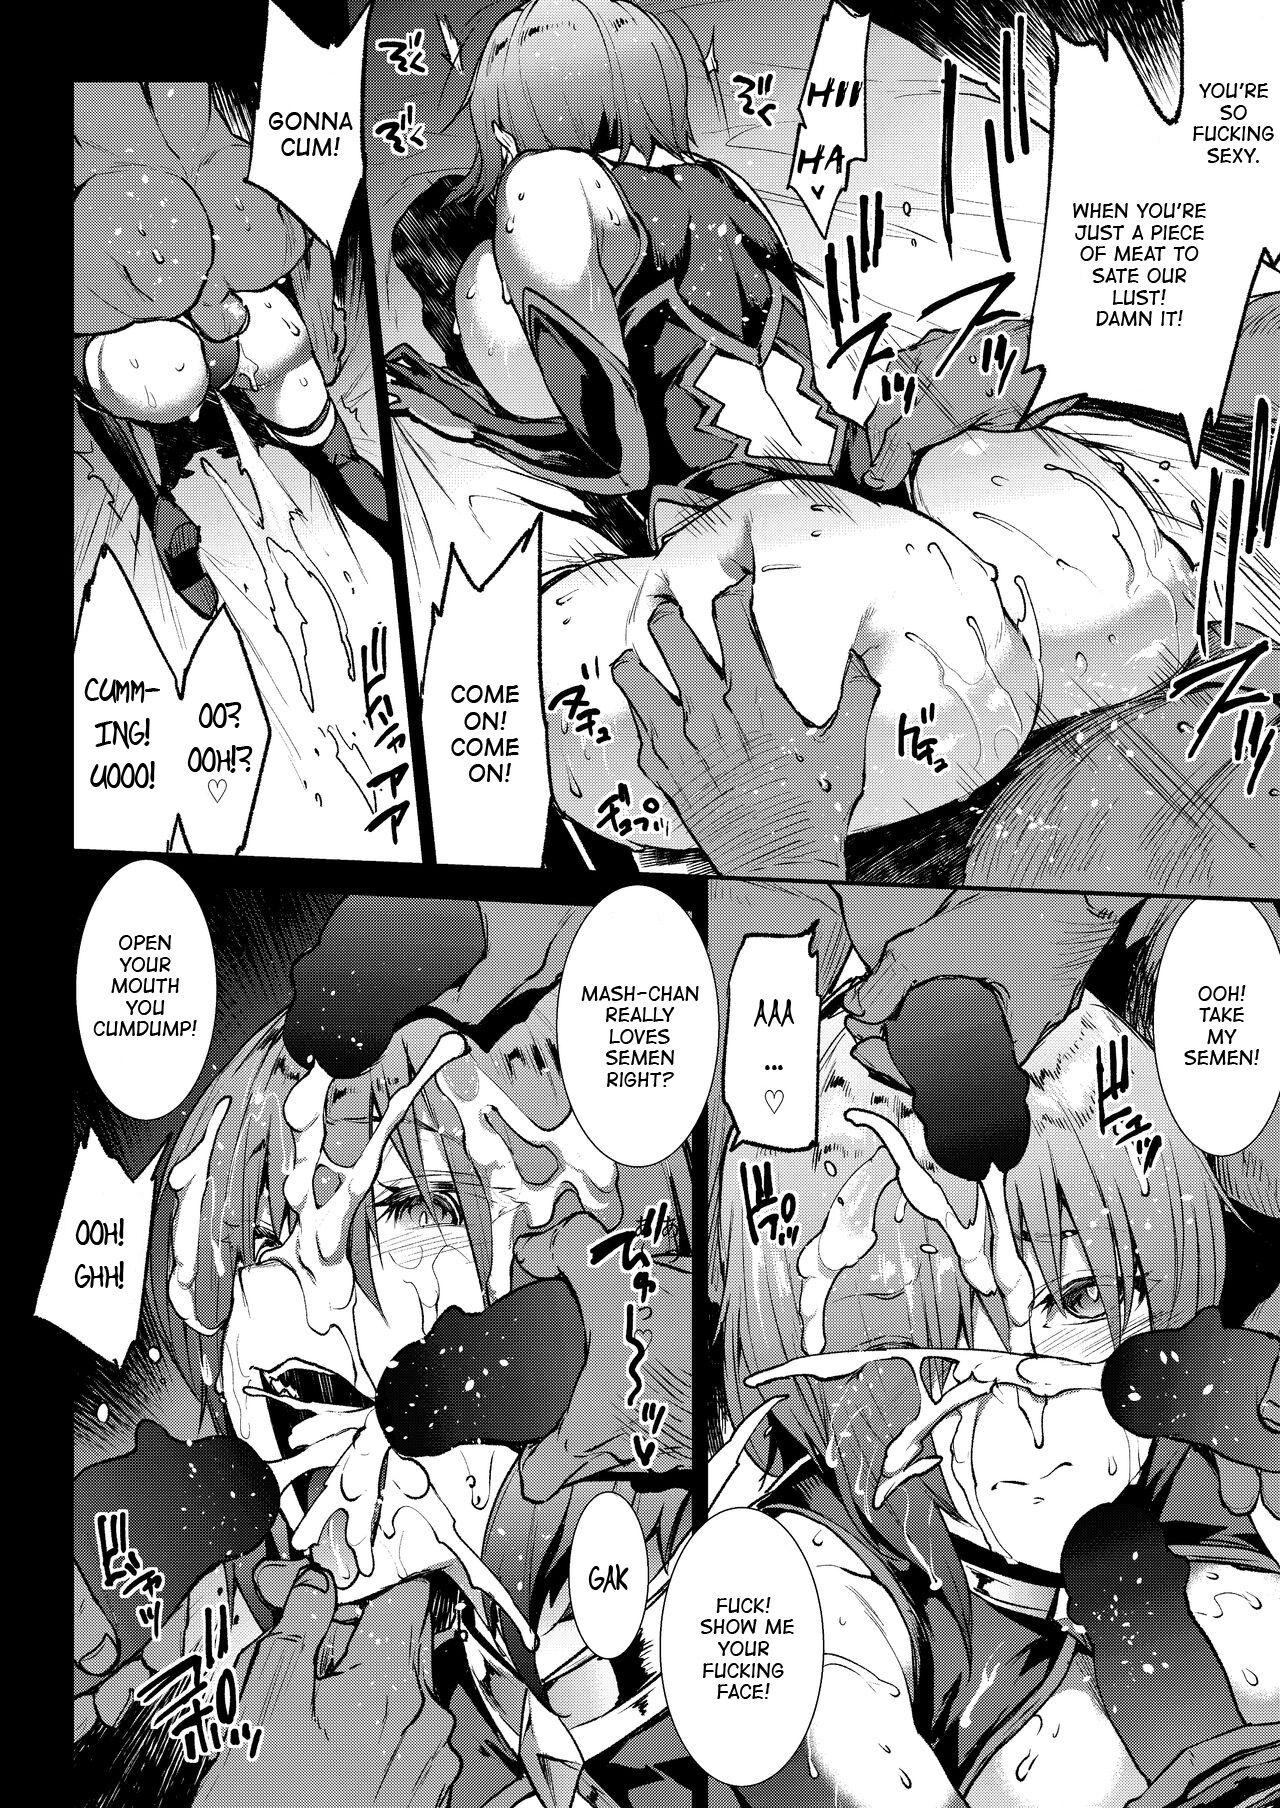 Cum On Pussy Mash, Rape. - Fate grand order Ass Sex - Page 12